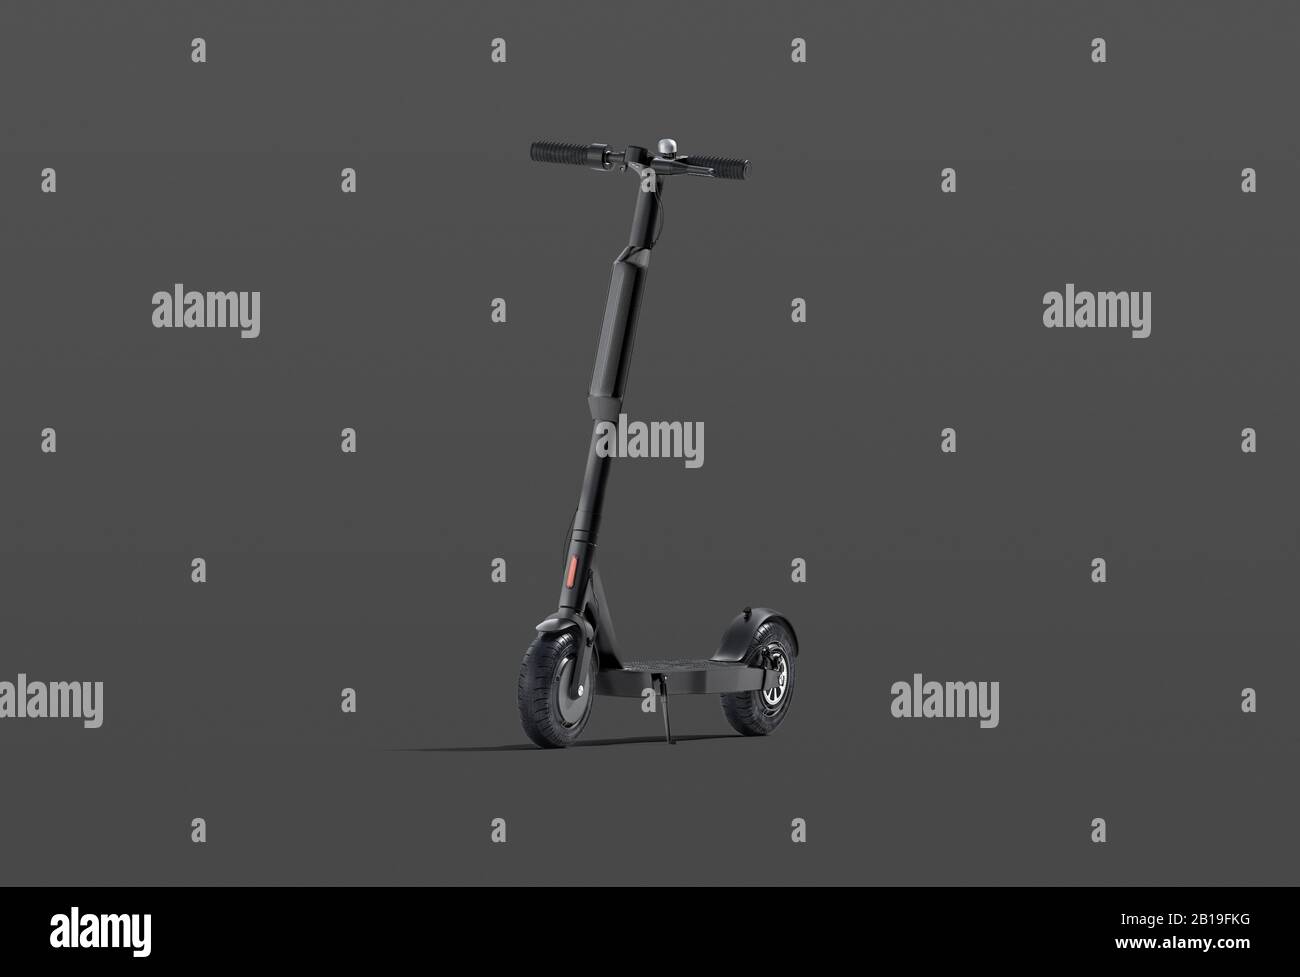 Blank black electric scooter with banner mockup on dark background Stock Photo